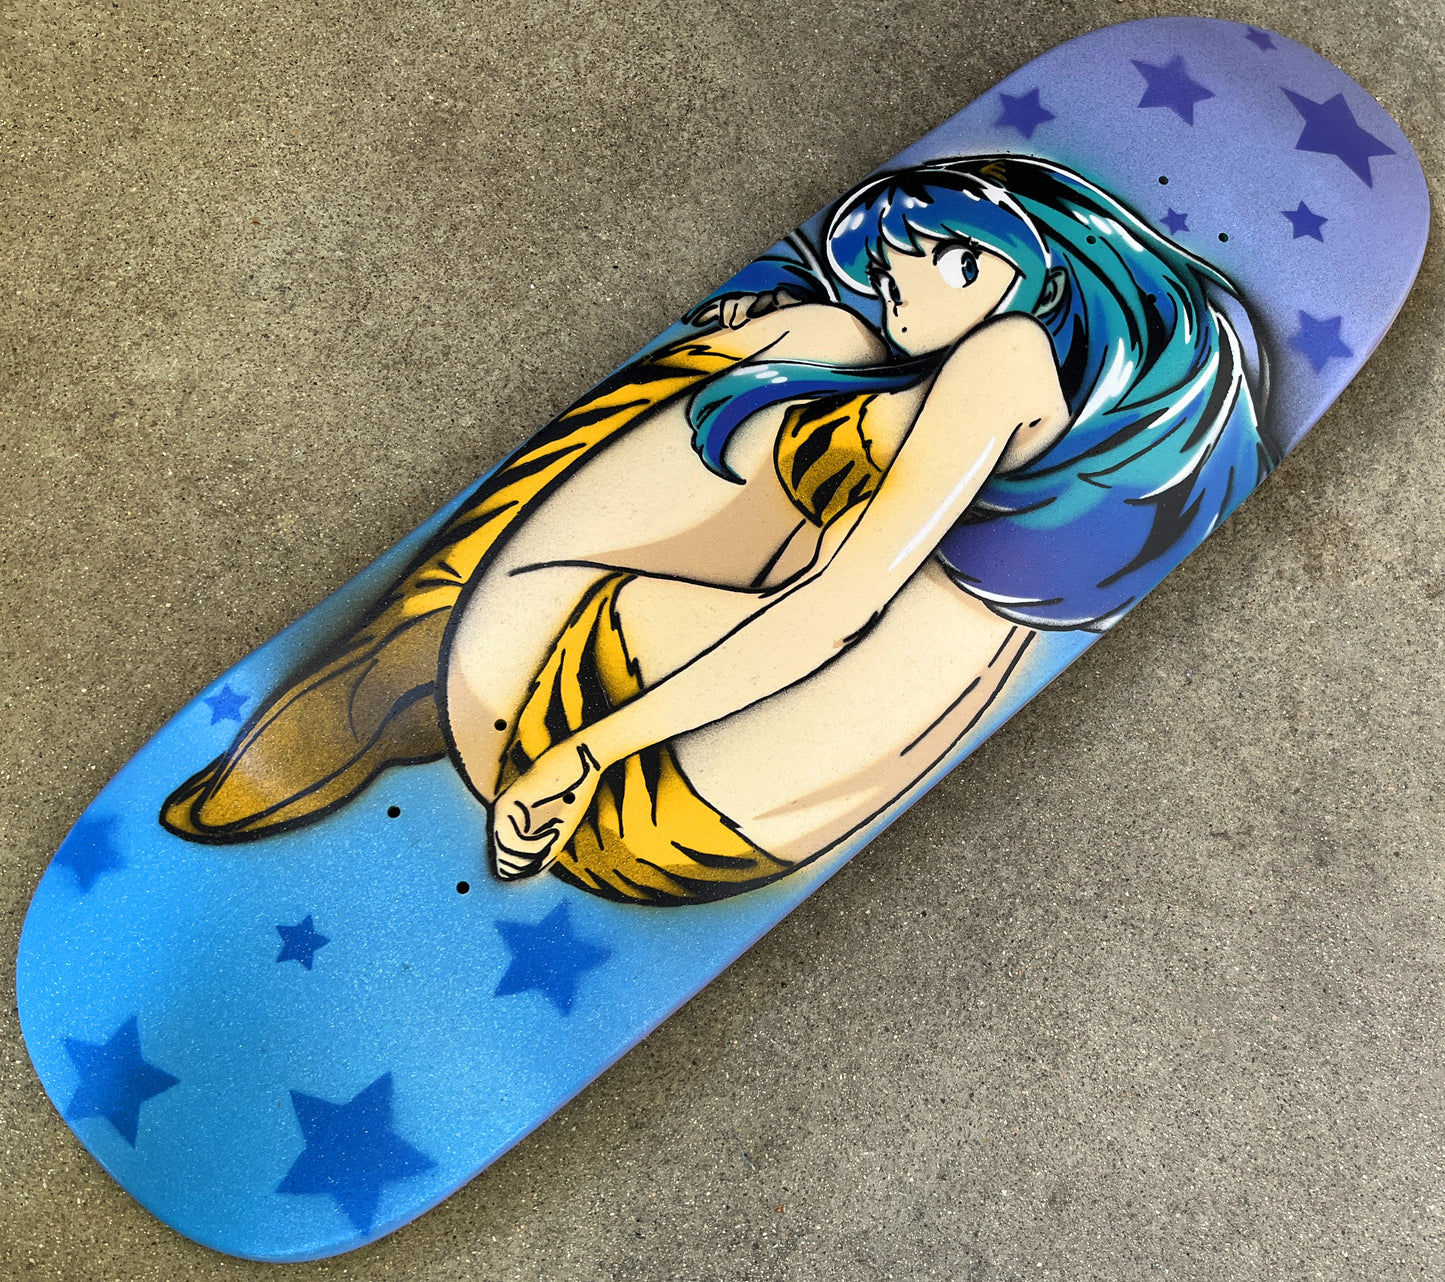 HAND PAINTED lum  board with spray can PURPLE/BLUE